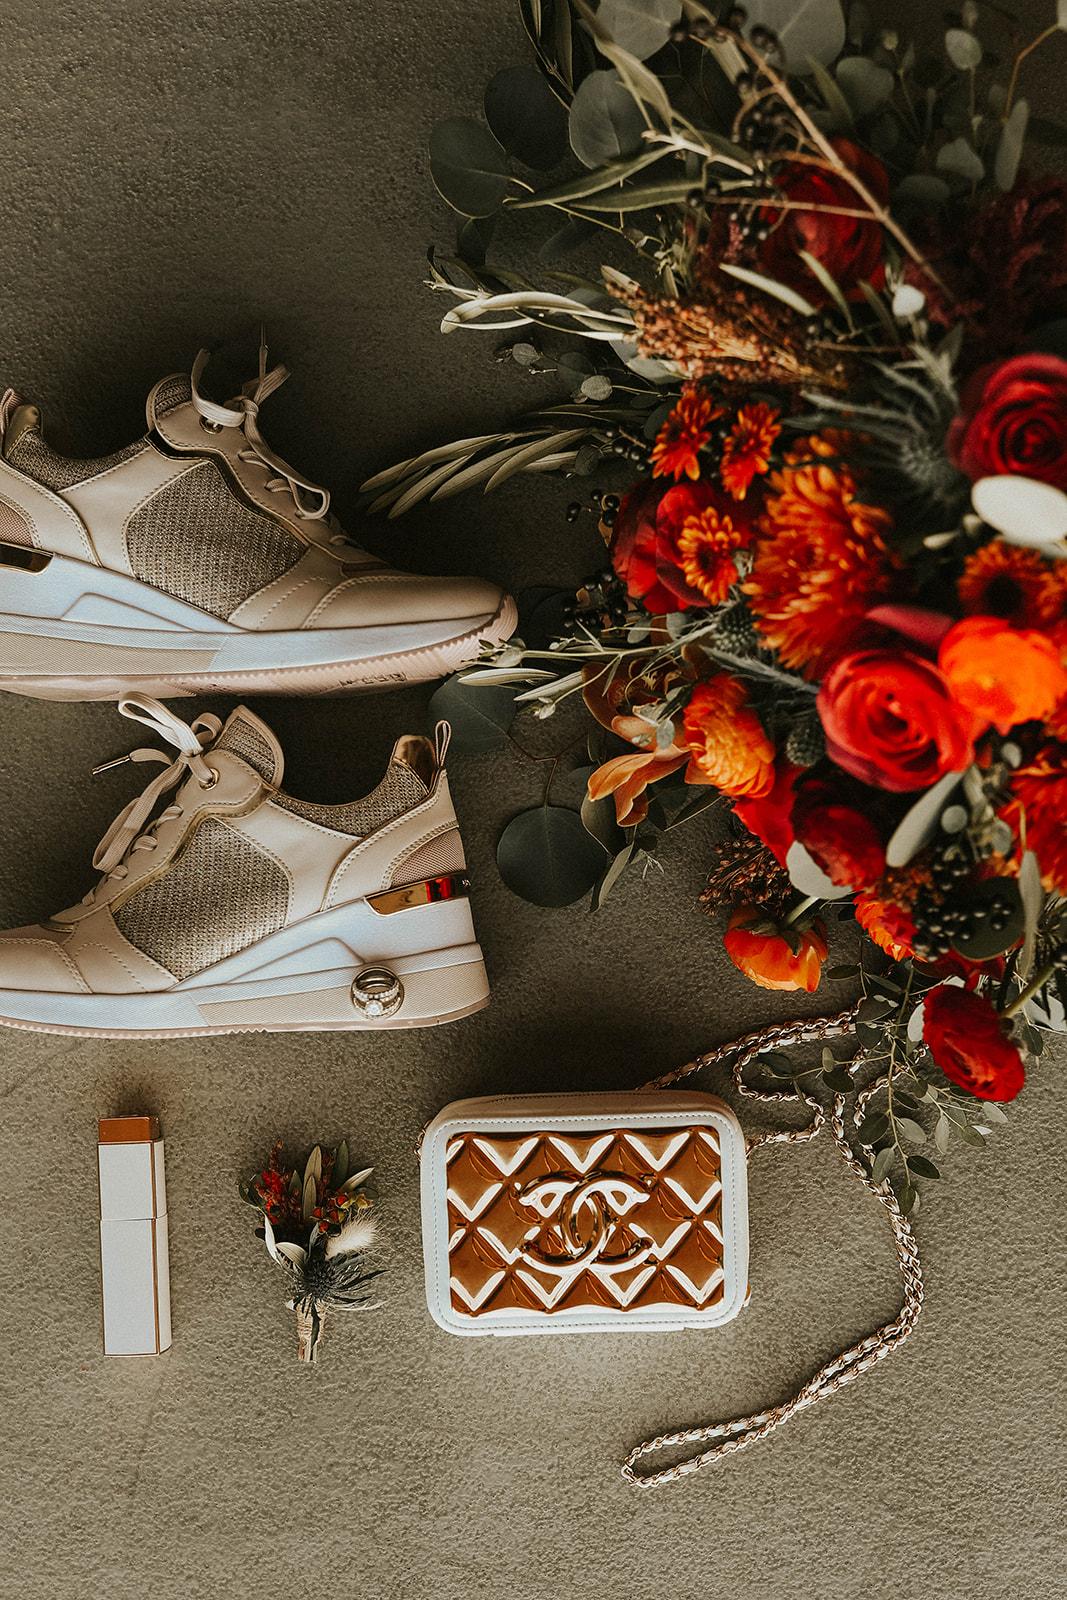 Wedding Details of Rings, Michael Kors Sneakers, Chanel Purse, Fall Inspired Bouquet & Boutonniere. 